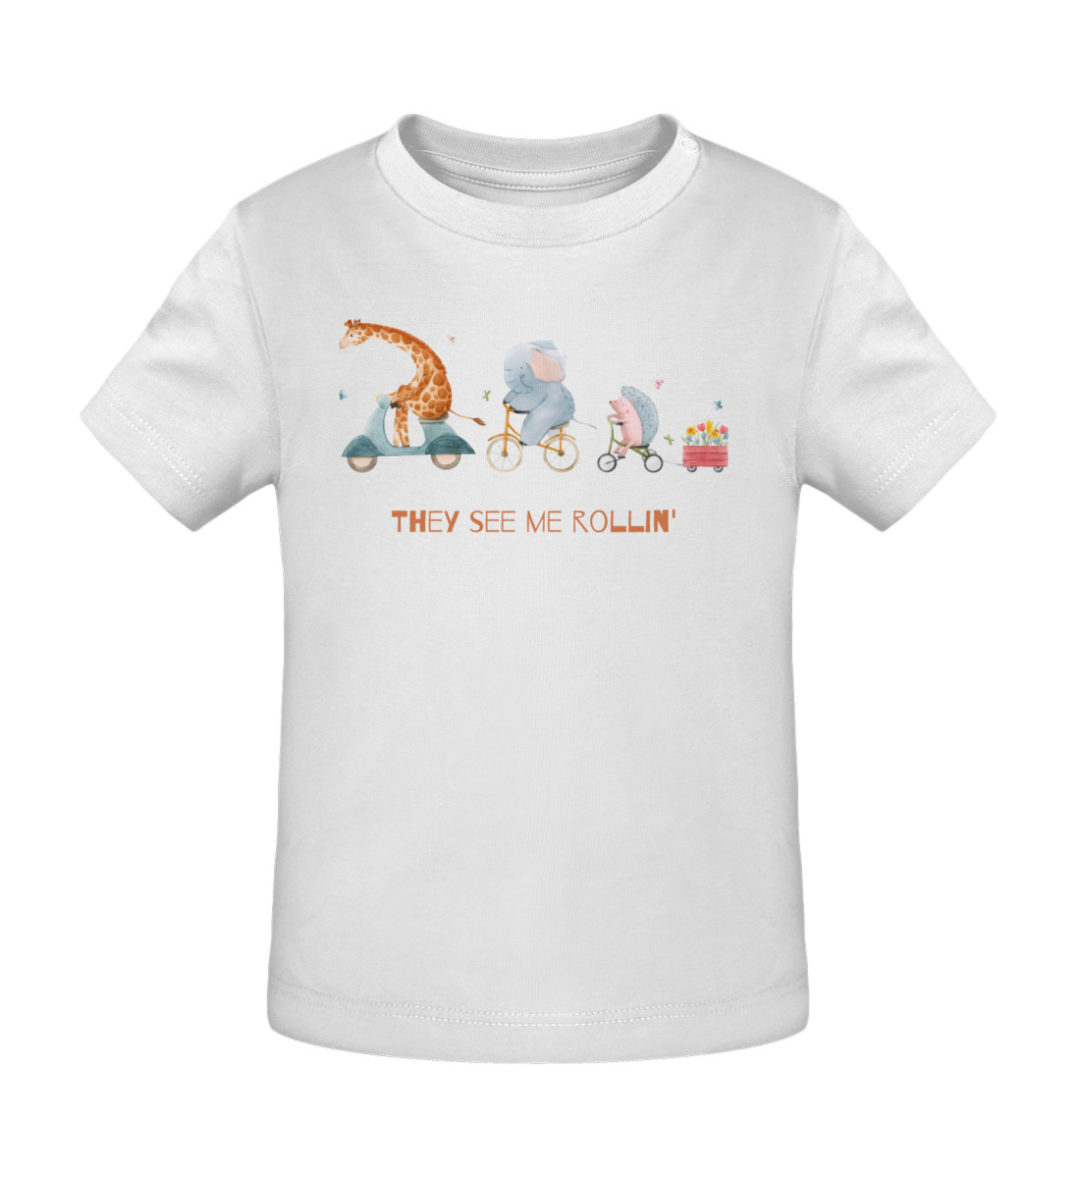 They see me rollin- - Baby Creator T-Shirt ST/ST-3